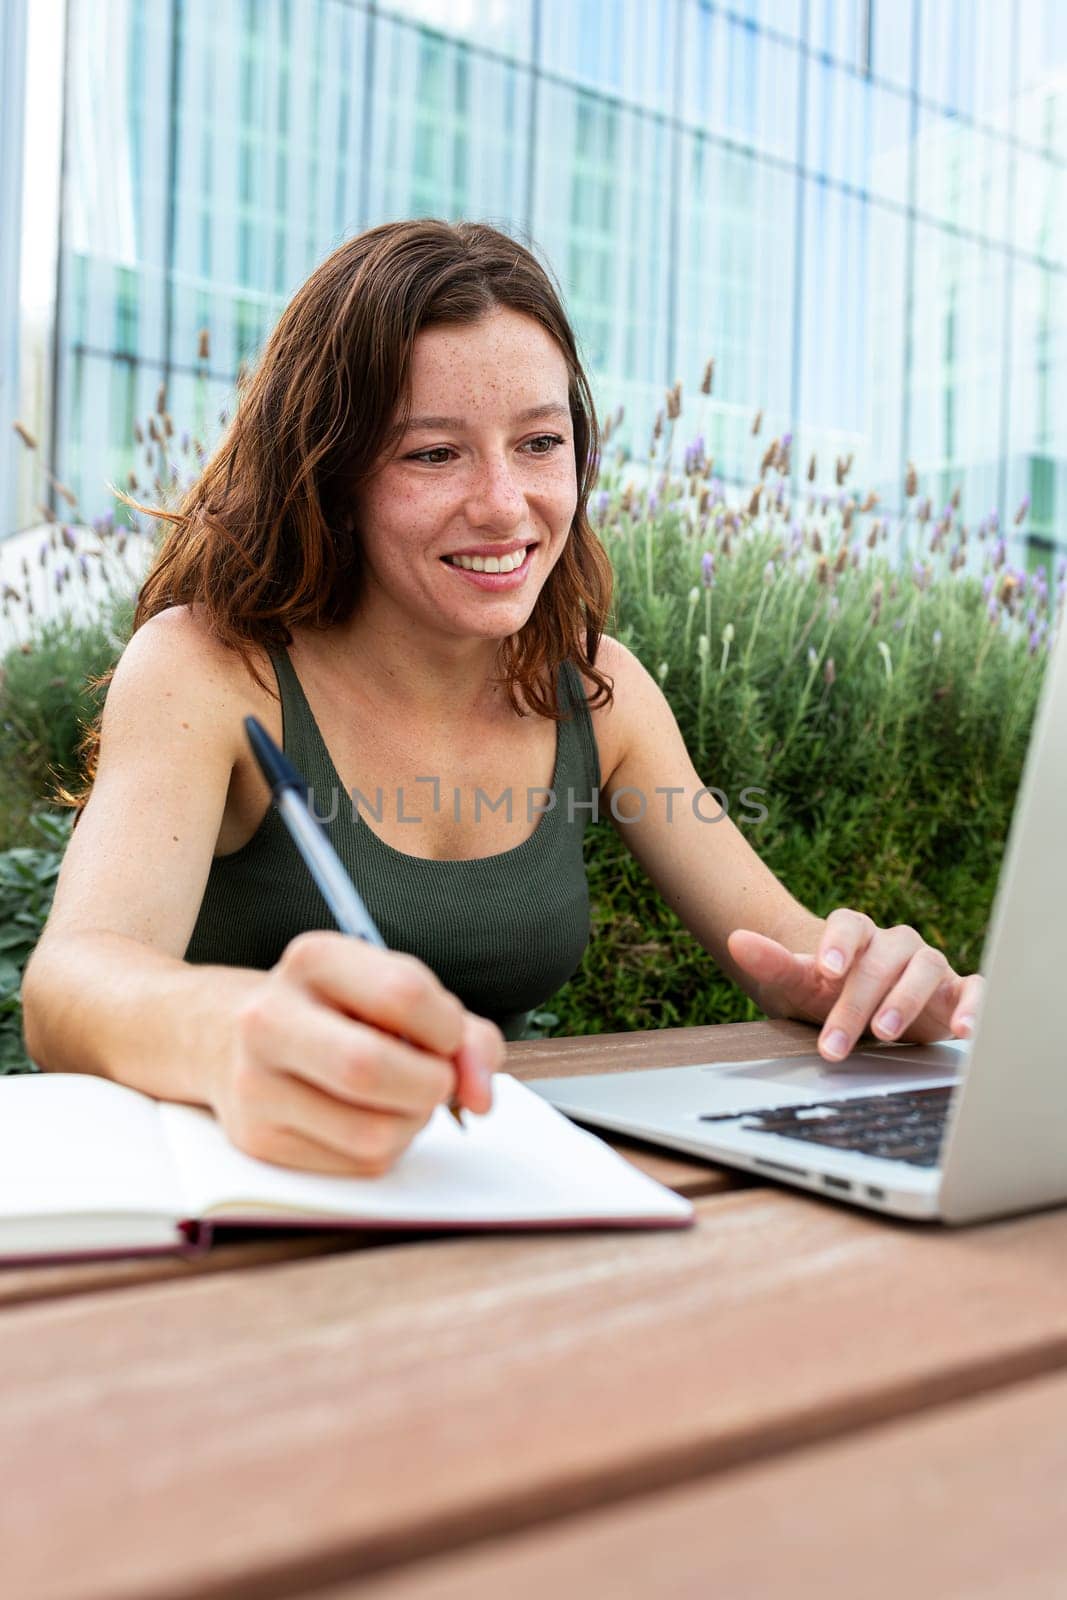 Smiling young redhead female university student writing on notebook with pen while doing homework using laptop outdoors. Vertical image. College concept.